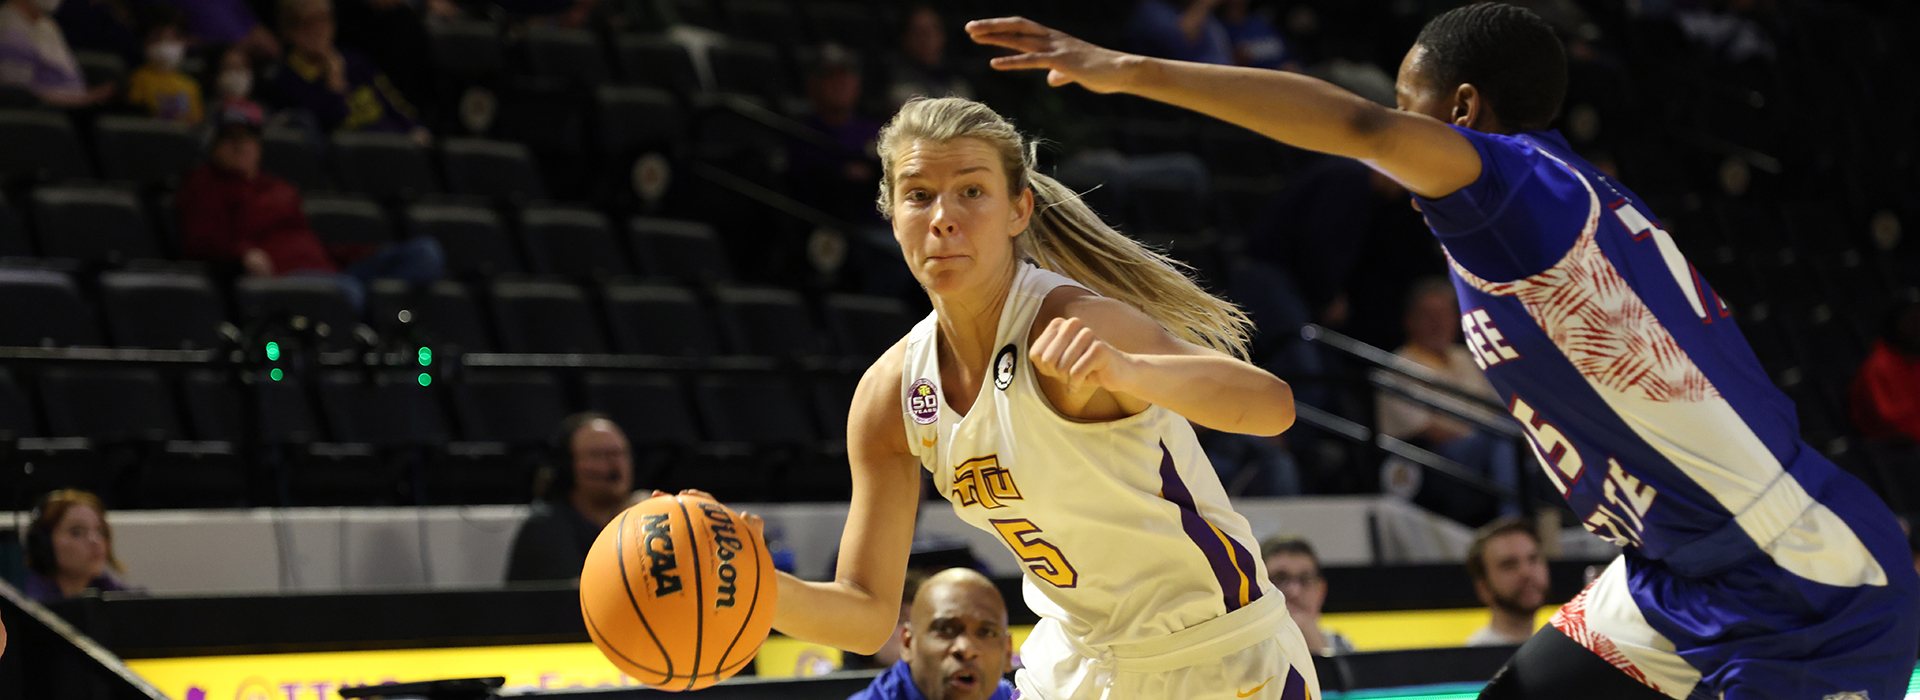 Golden Eagles clinch No. 2 OVC seed with win over TSU